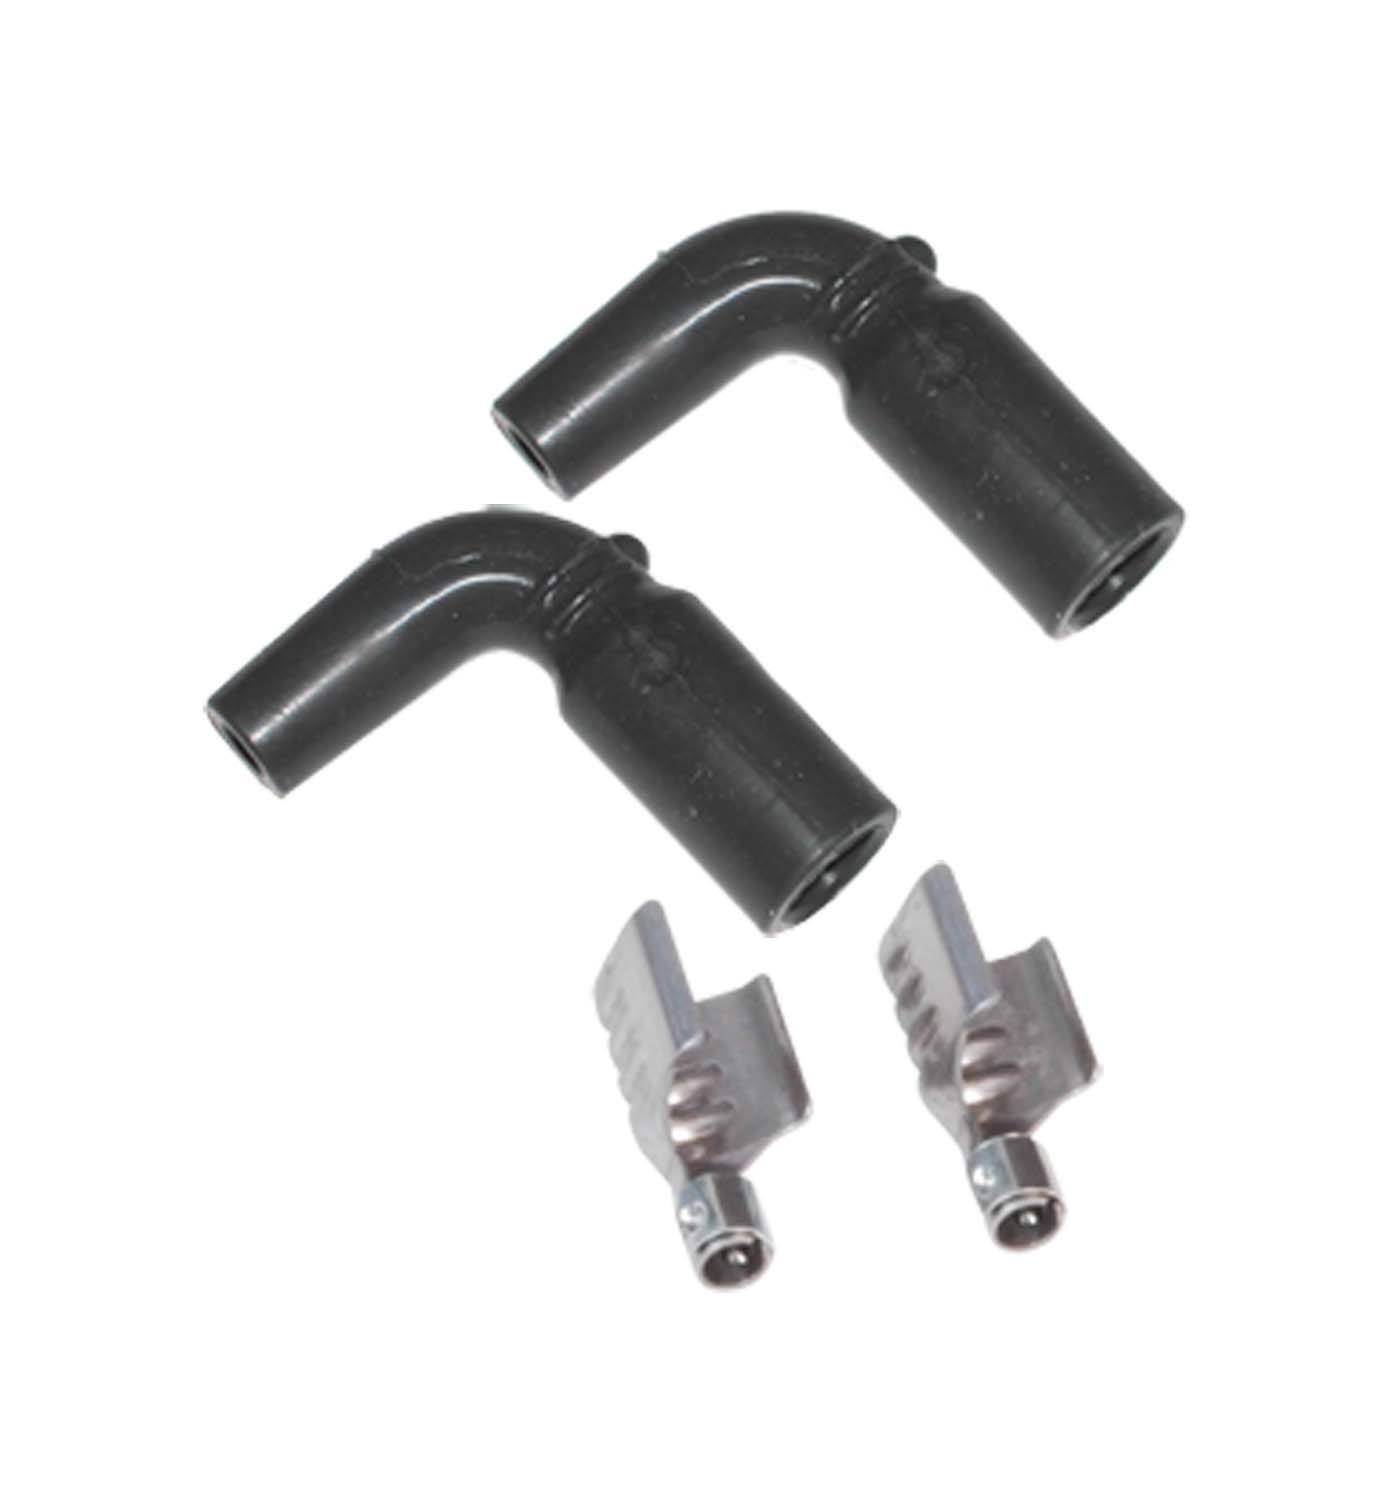 MSD Ignition 3303 Boot / Terminal Kit, Distributor / Coil, 8.5 mm, Black, 90 Degree, Socket Style, GM LT-Series 1992-97, Pair